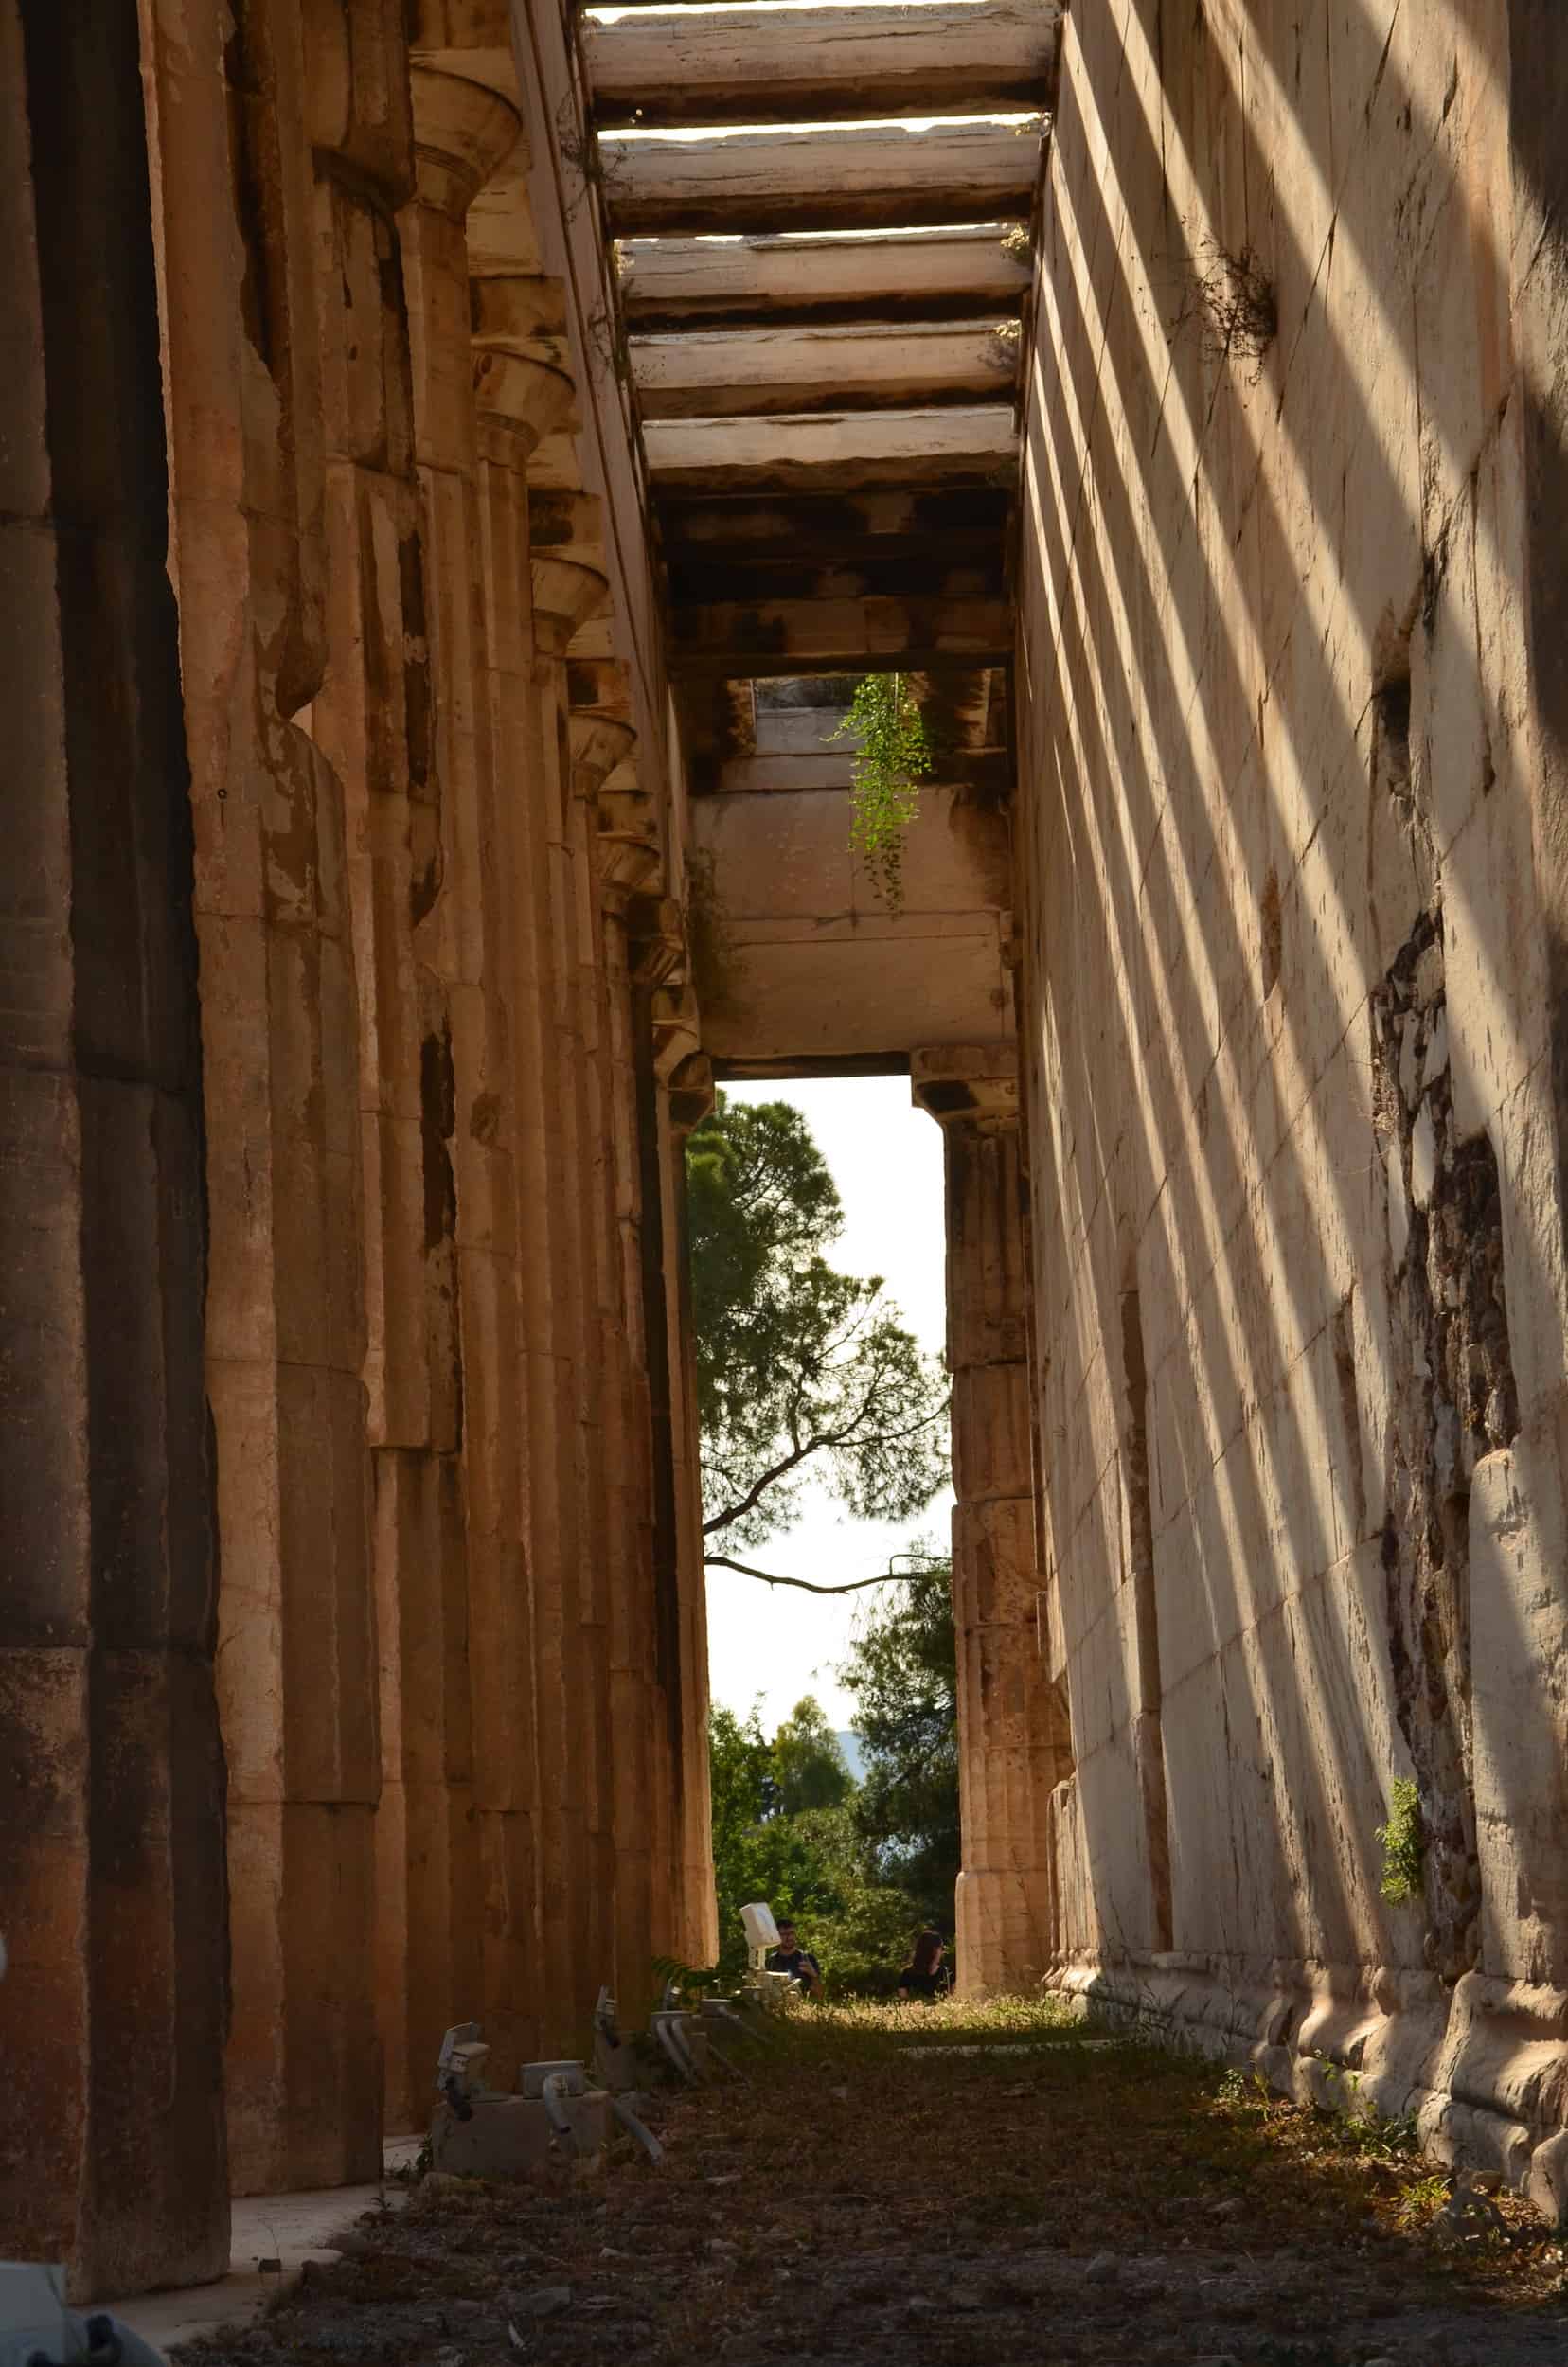 South peristyle of the Temple of Hephaestus